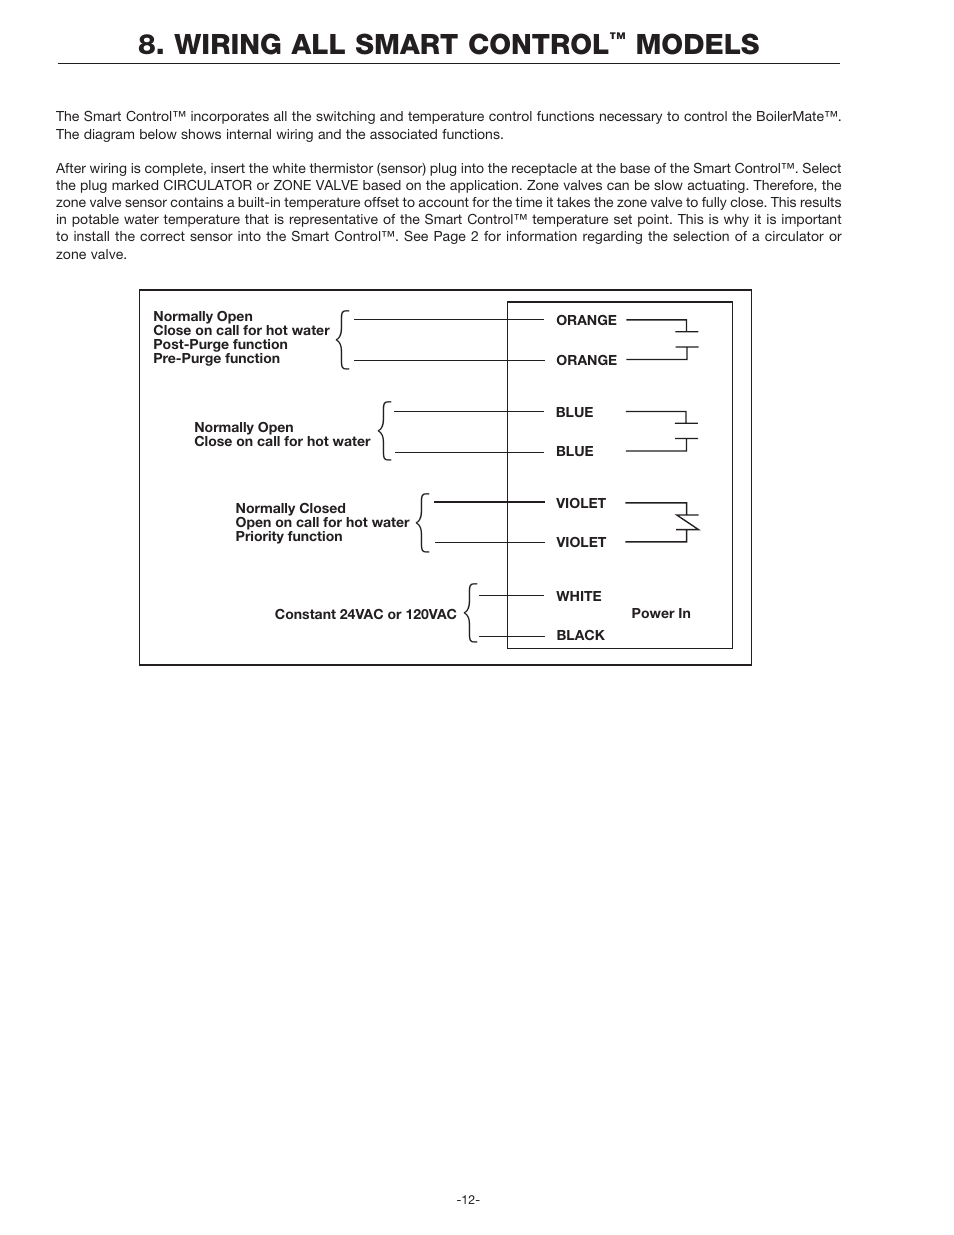 Wiring all smart control, Models | Amtrol BoilerMate Top Down User Manual | Page 12 / 32